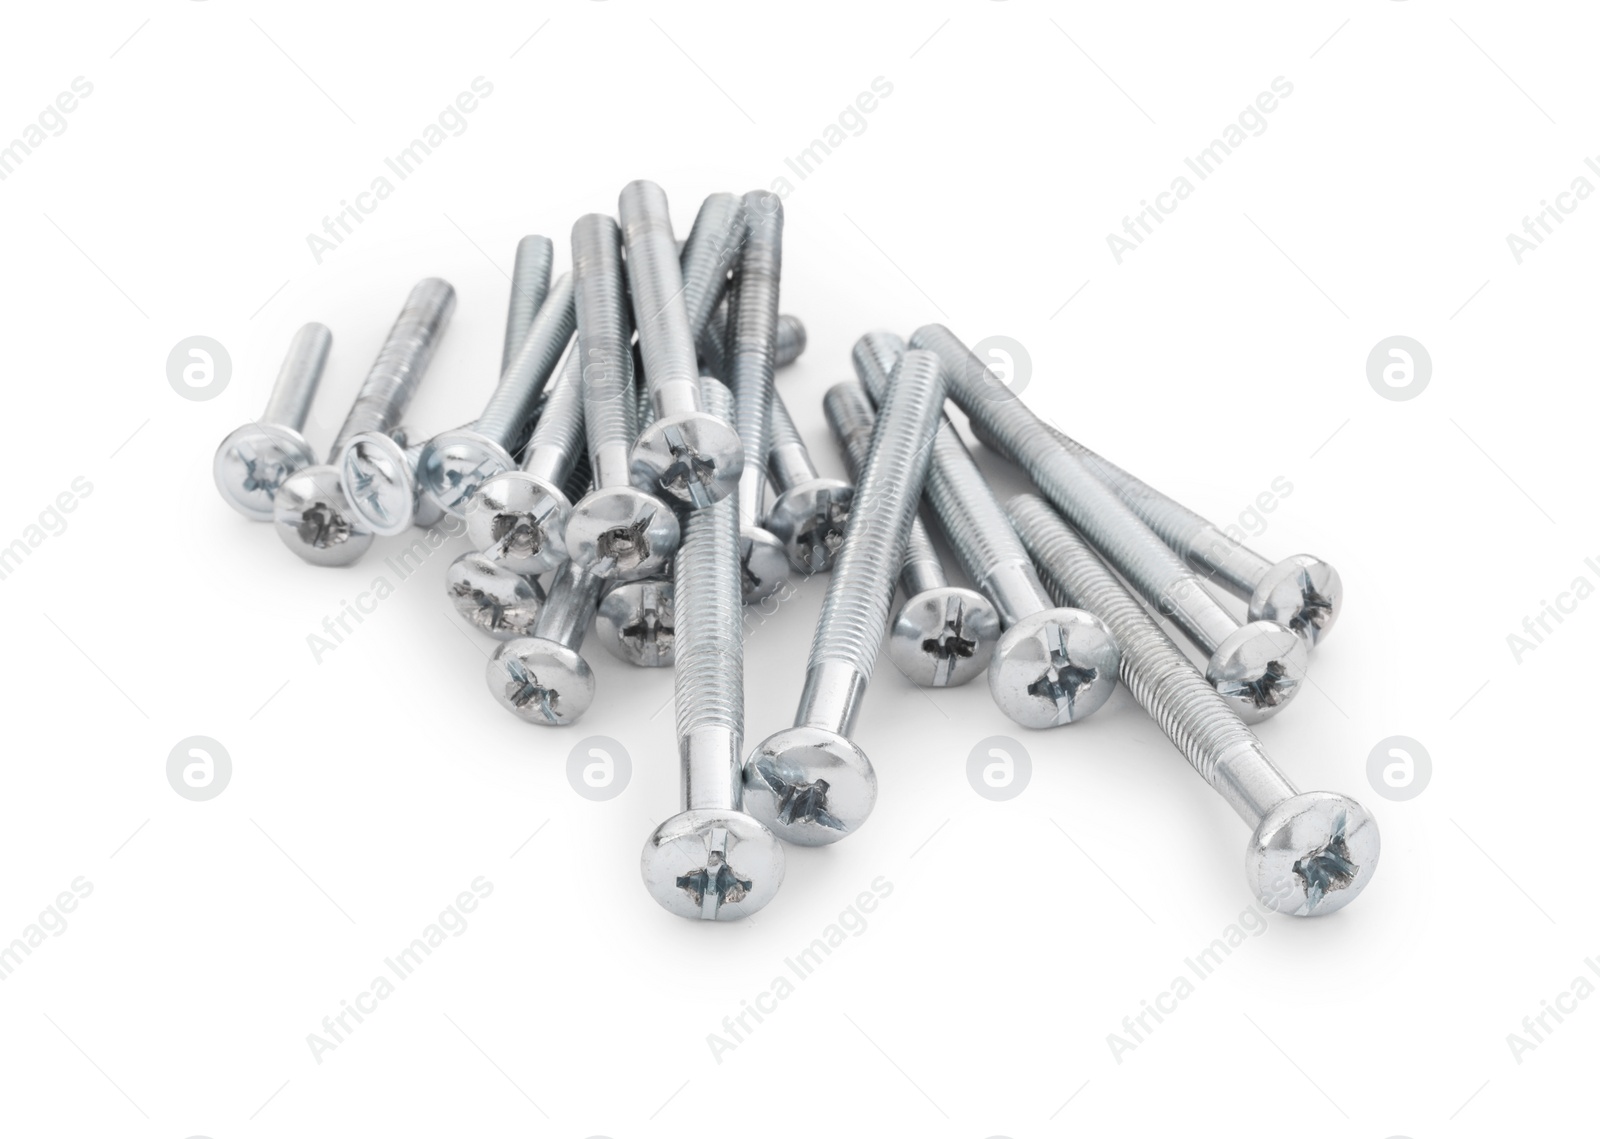 Photo of Metal bolts isolated on white. Hardware tool